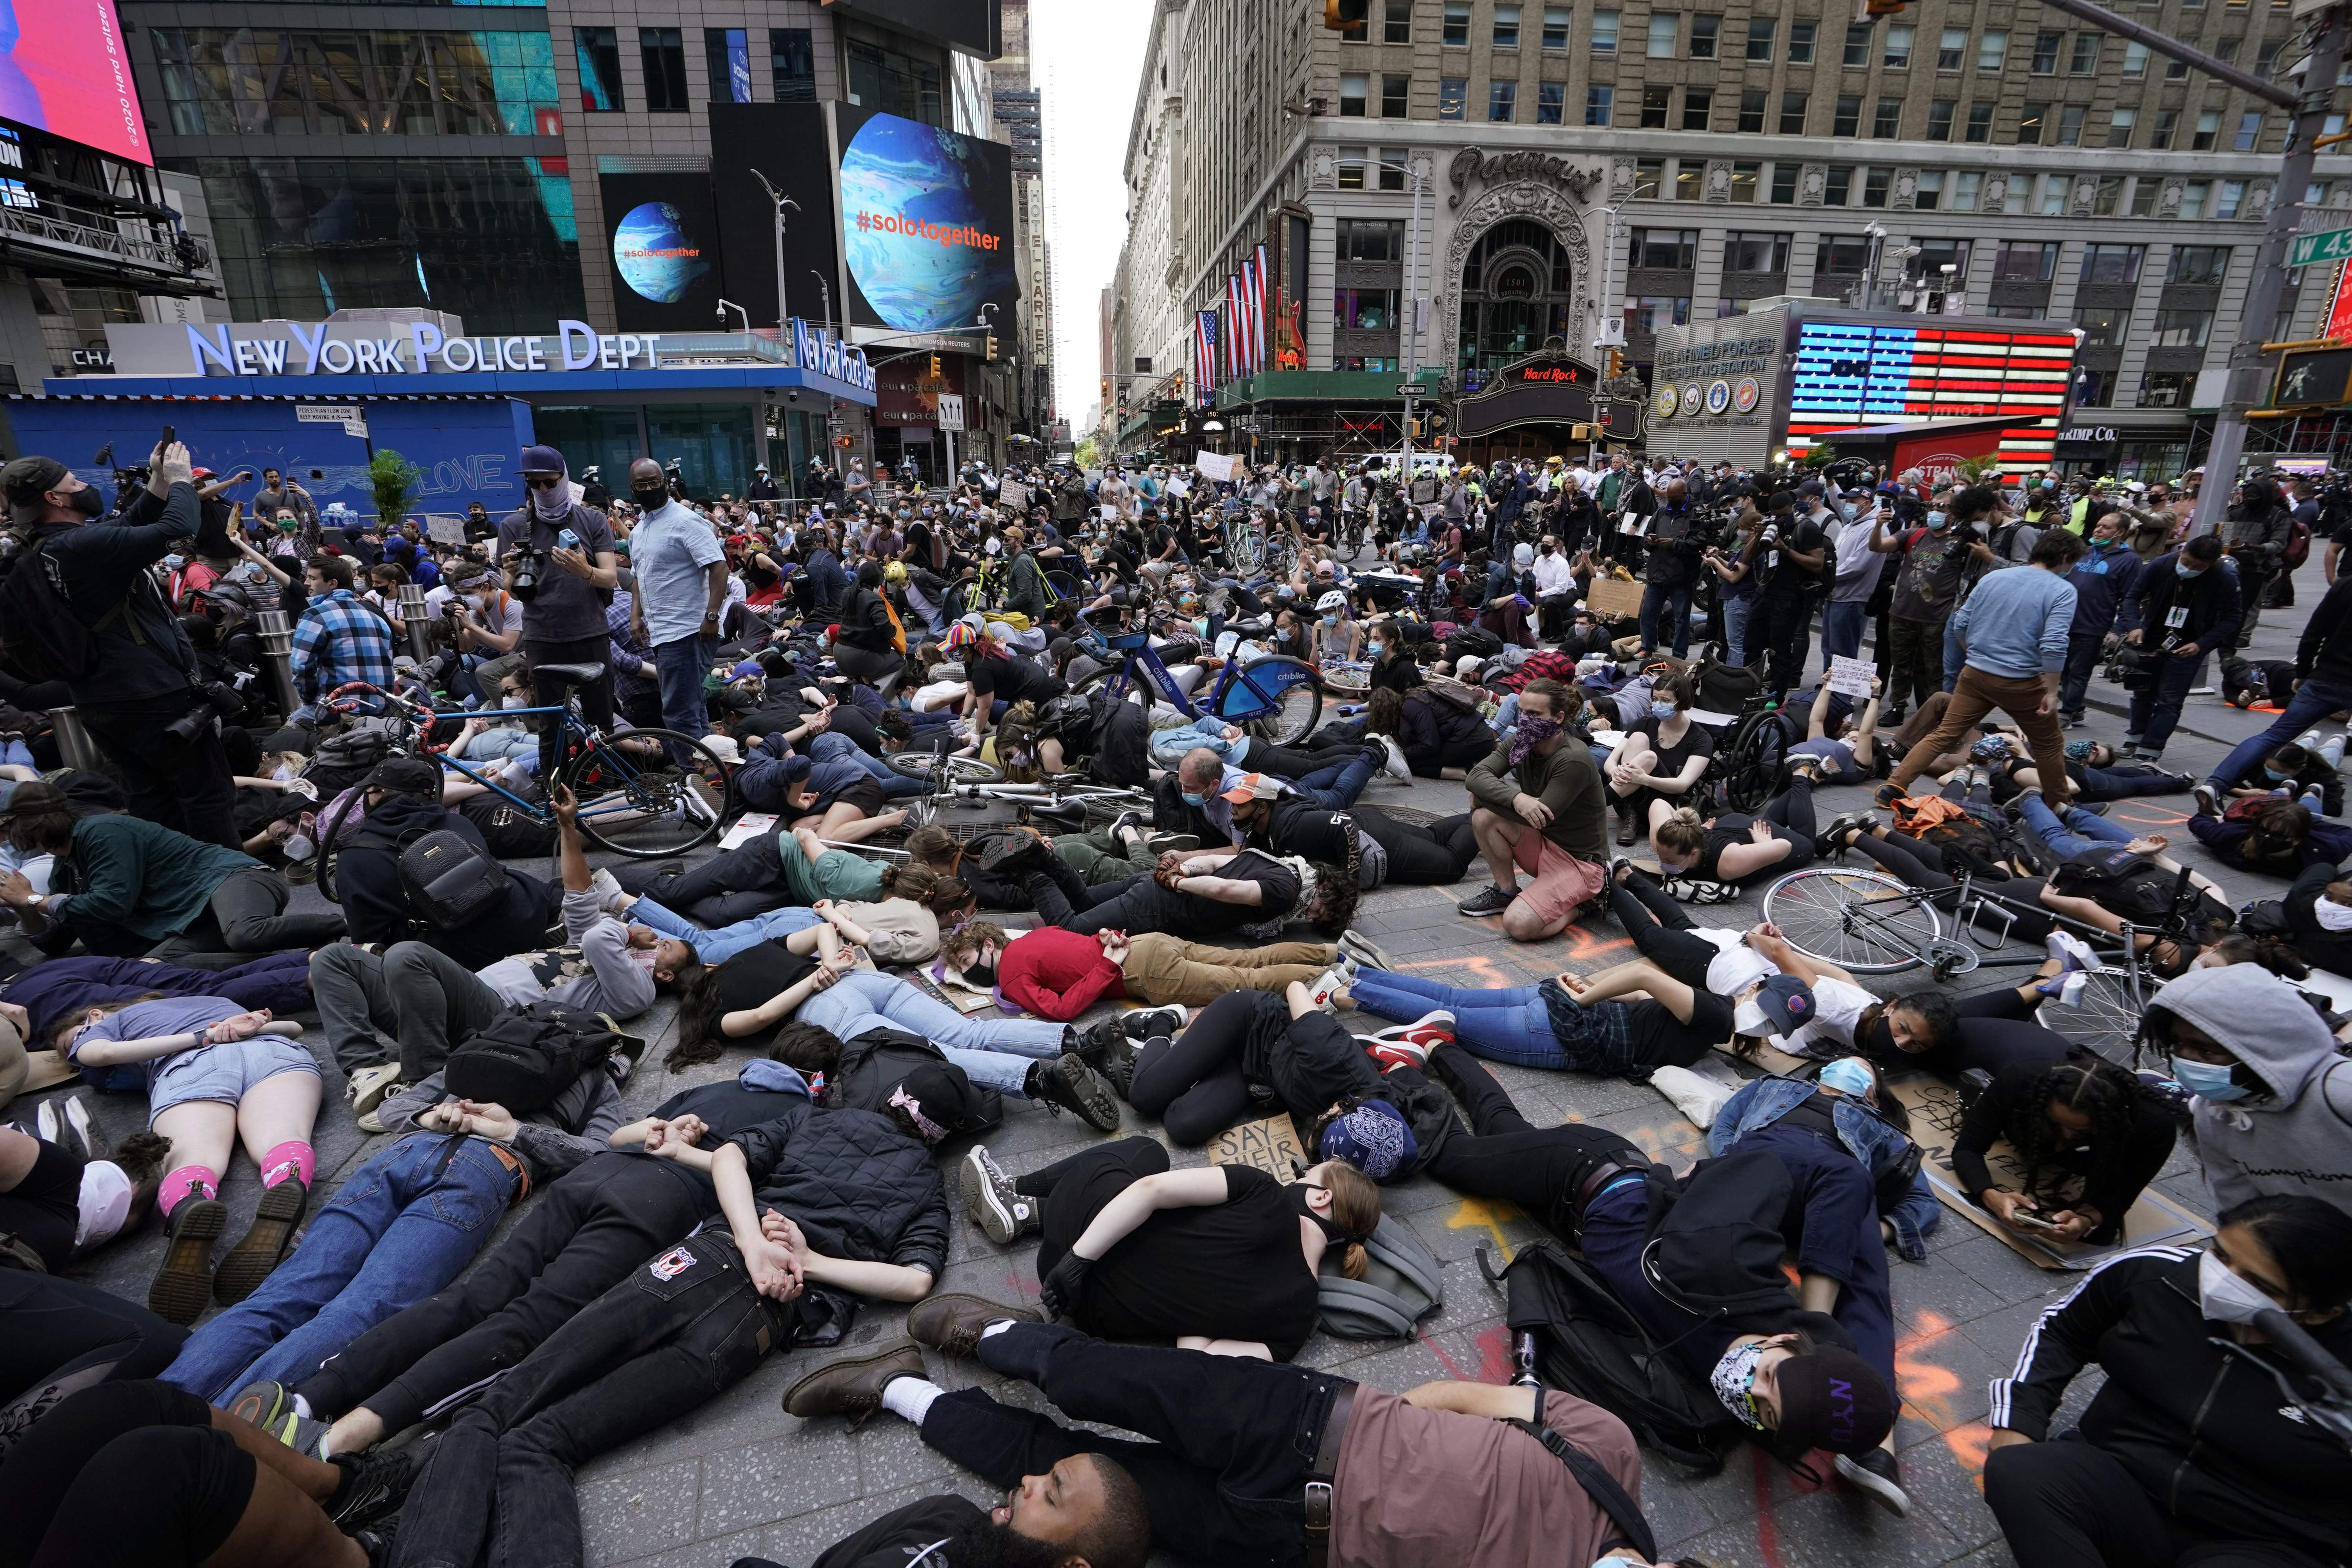 Protestors lay on the ground with their hands behind their back in a call for justice for George Floyd in Times Square on June 1, 2020